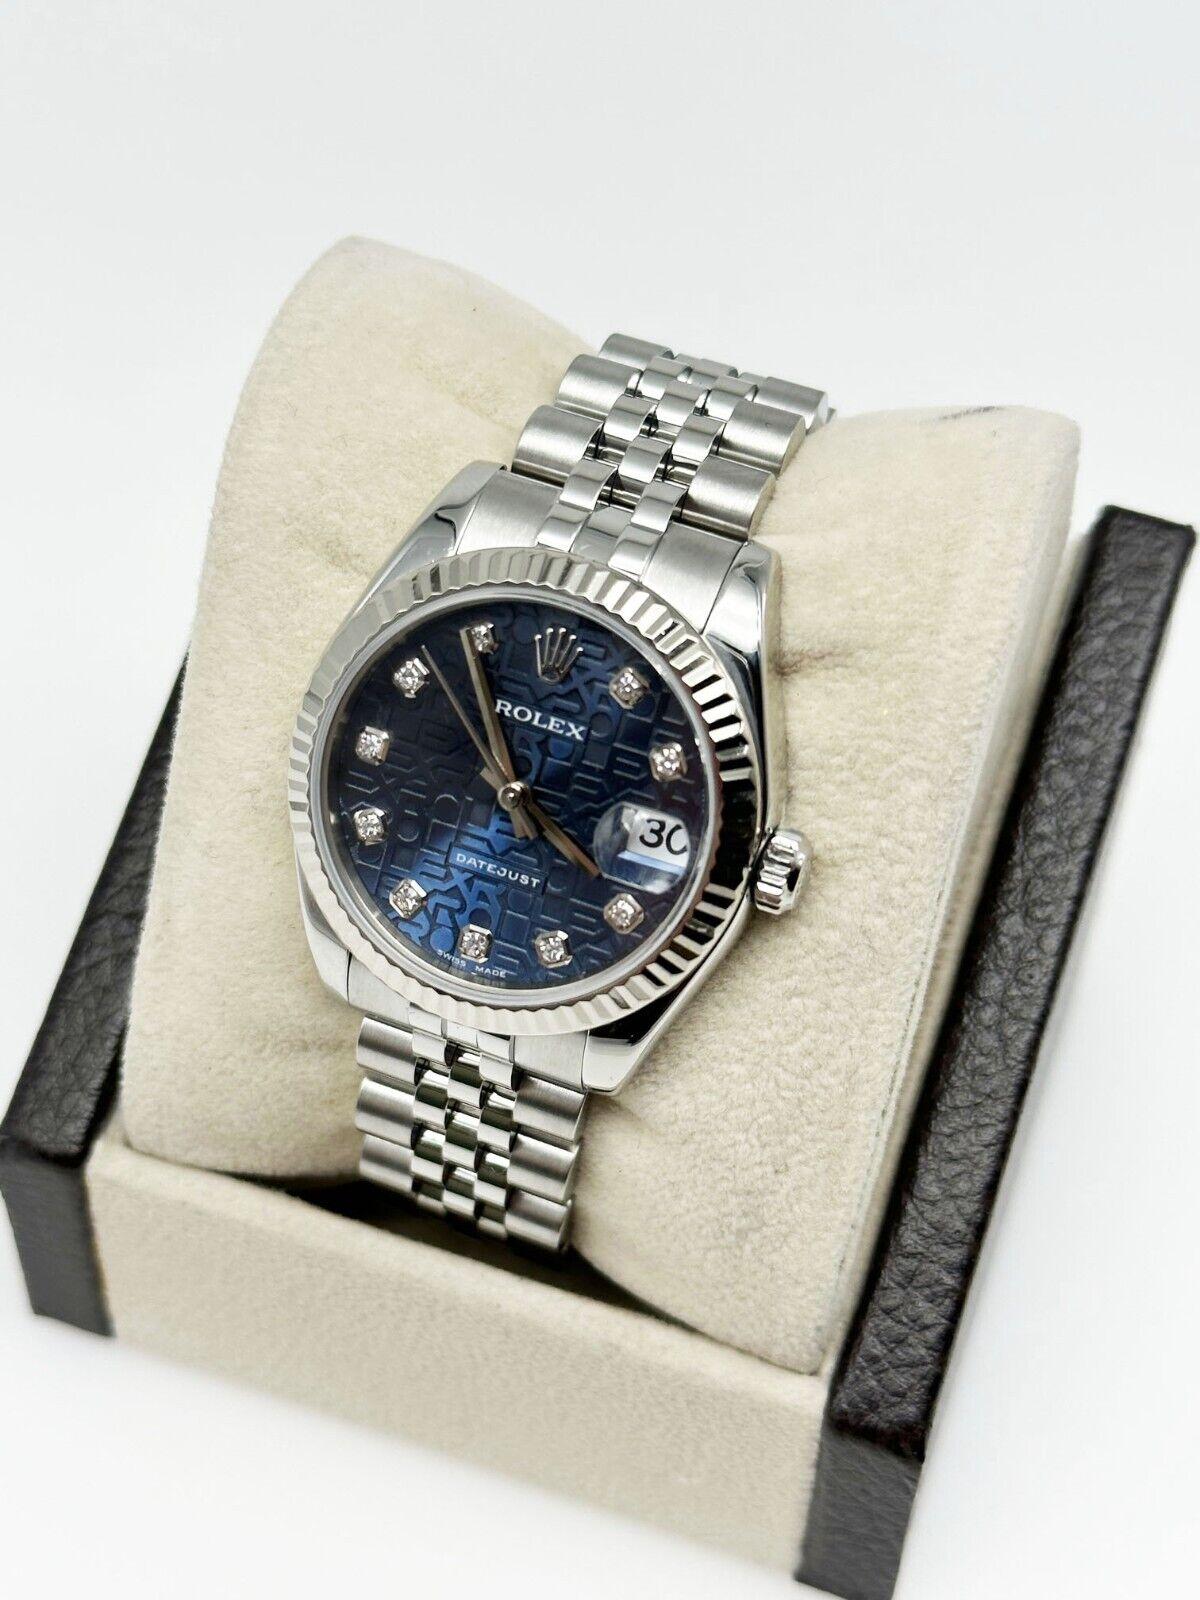 Style Number: 178274

 

Serial: D299***


Year: 2005

 

Model: Datejust Midsize

 

Case Material: Stainless Steel

 

Band: Stainless Steel

 

Bezel: 18K White Gold

 

Dial: Original Blue Jubilee Diamond Dial

 

Face: Sapphire Crystal

 

Case